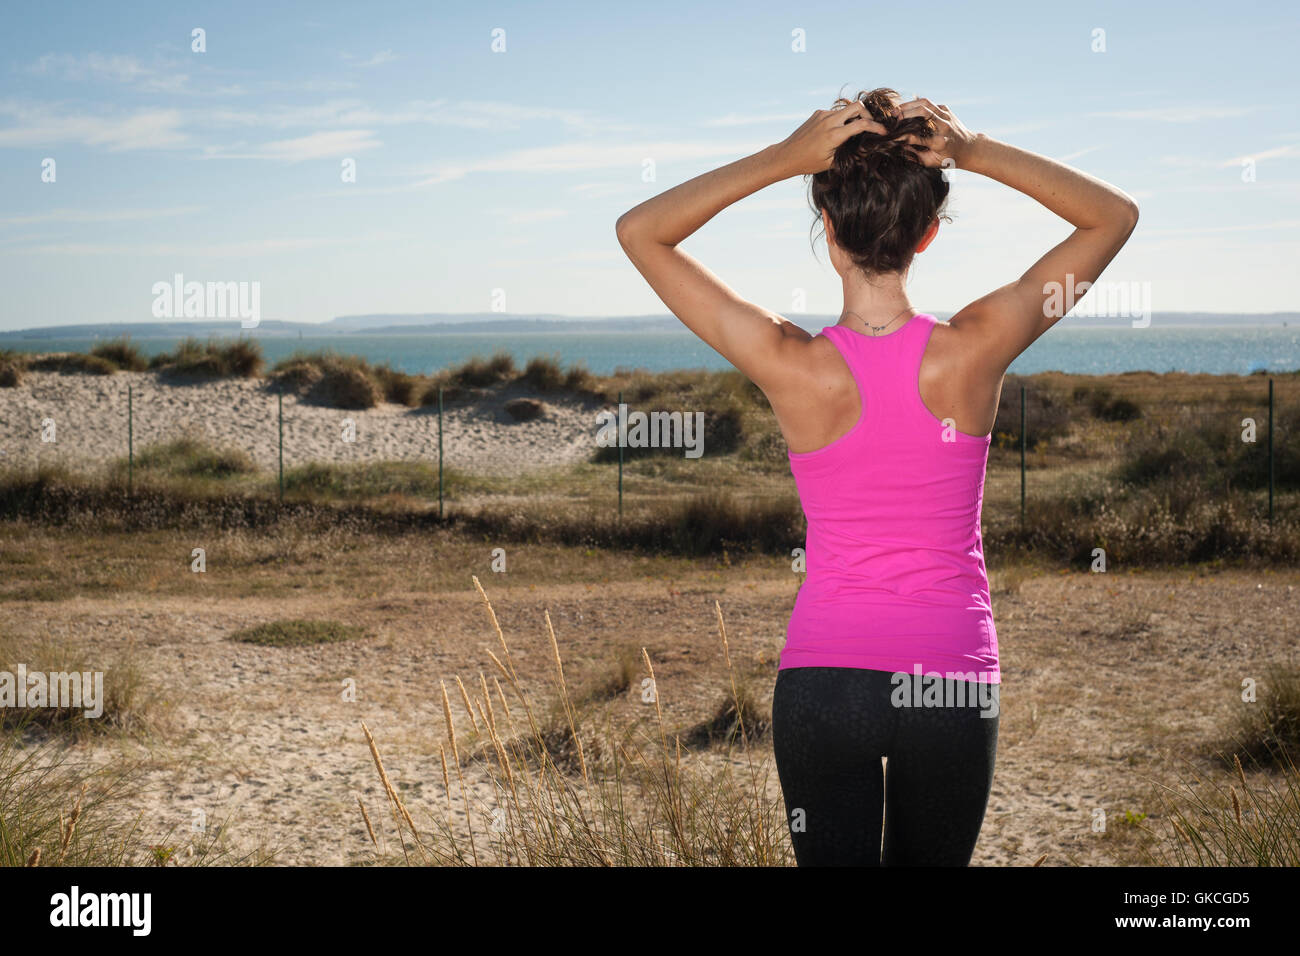 looking out to sea adjusting her hair after exercising and keeping fit Stock Photo